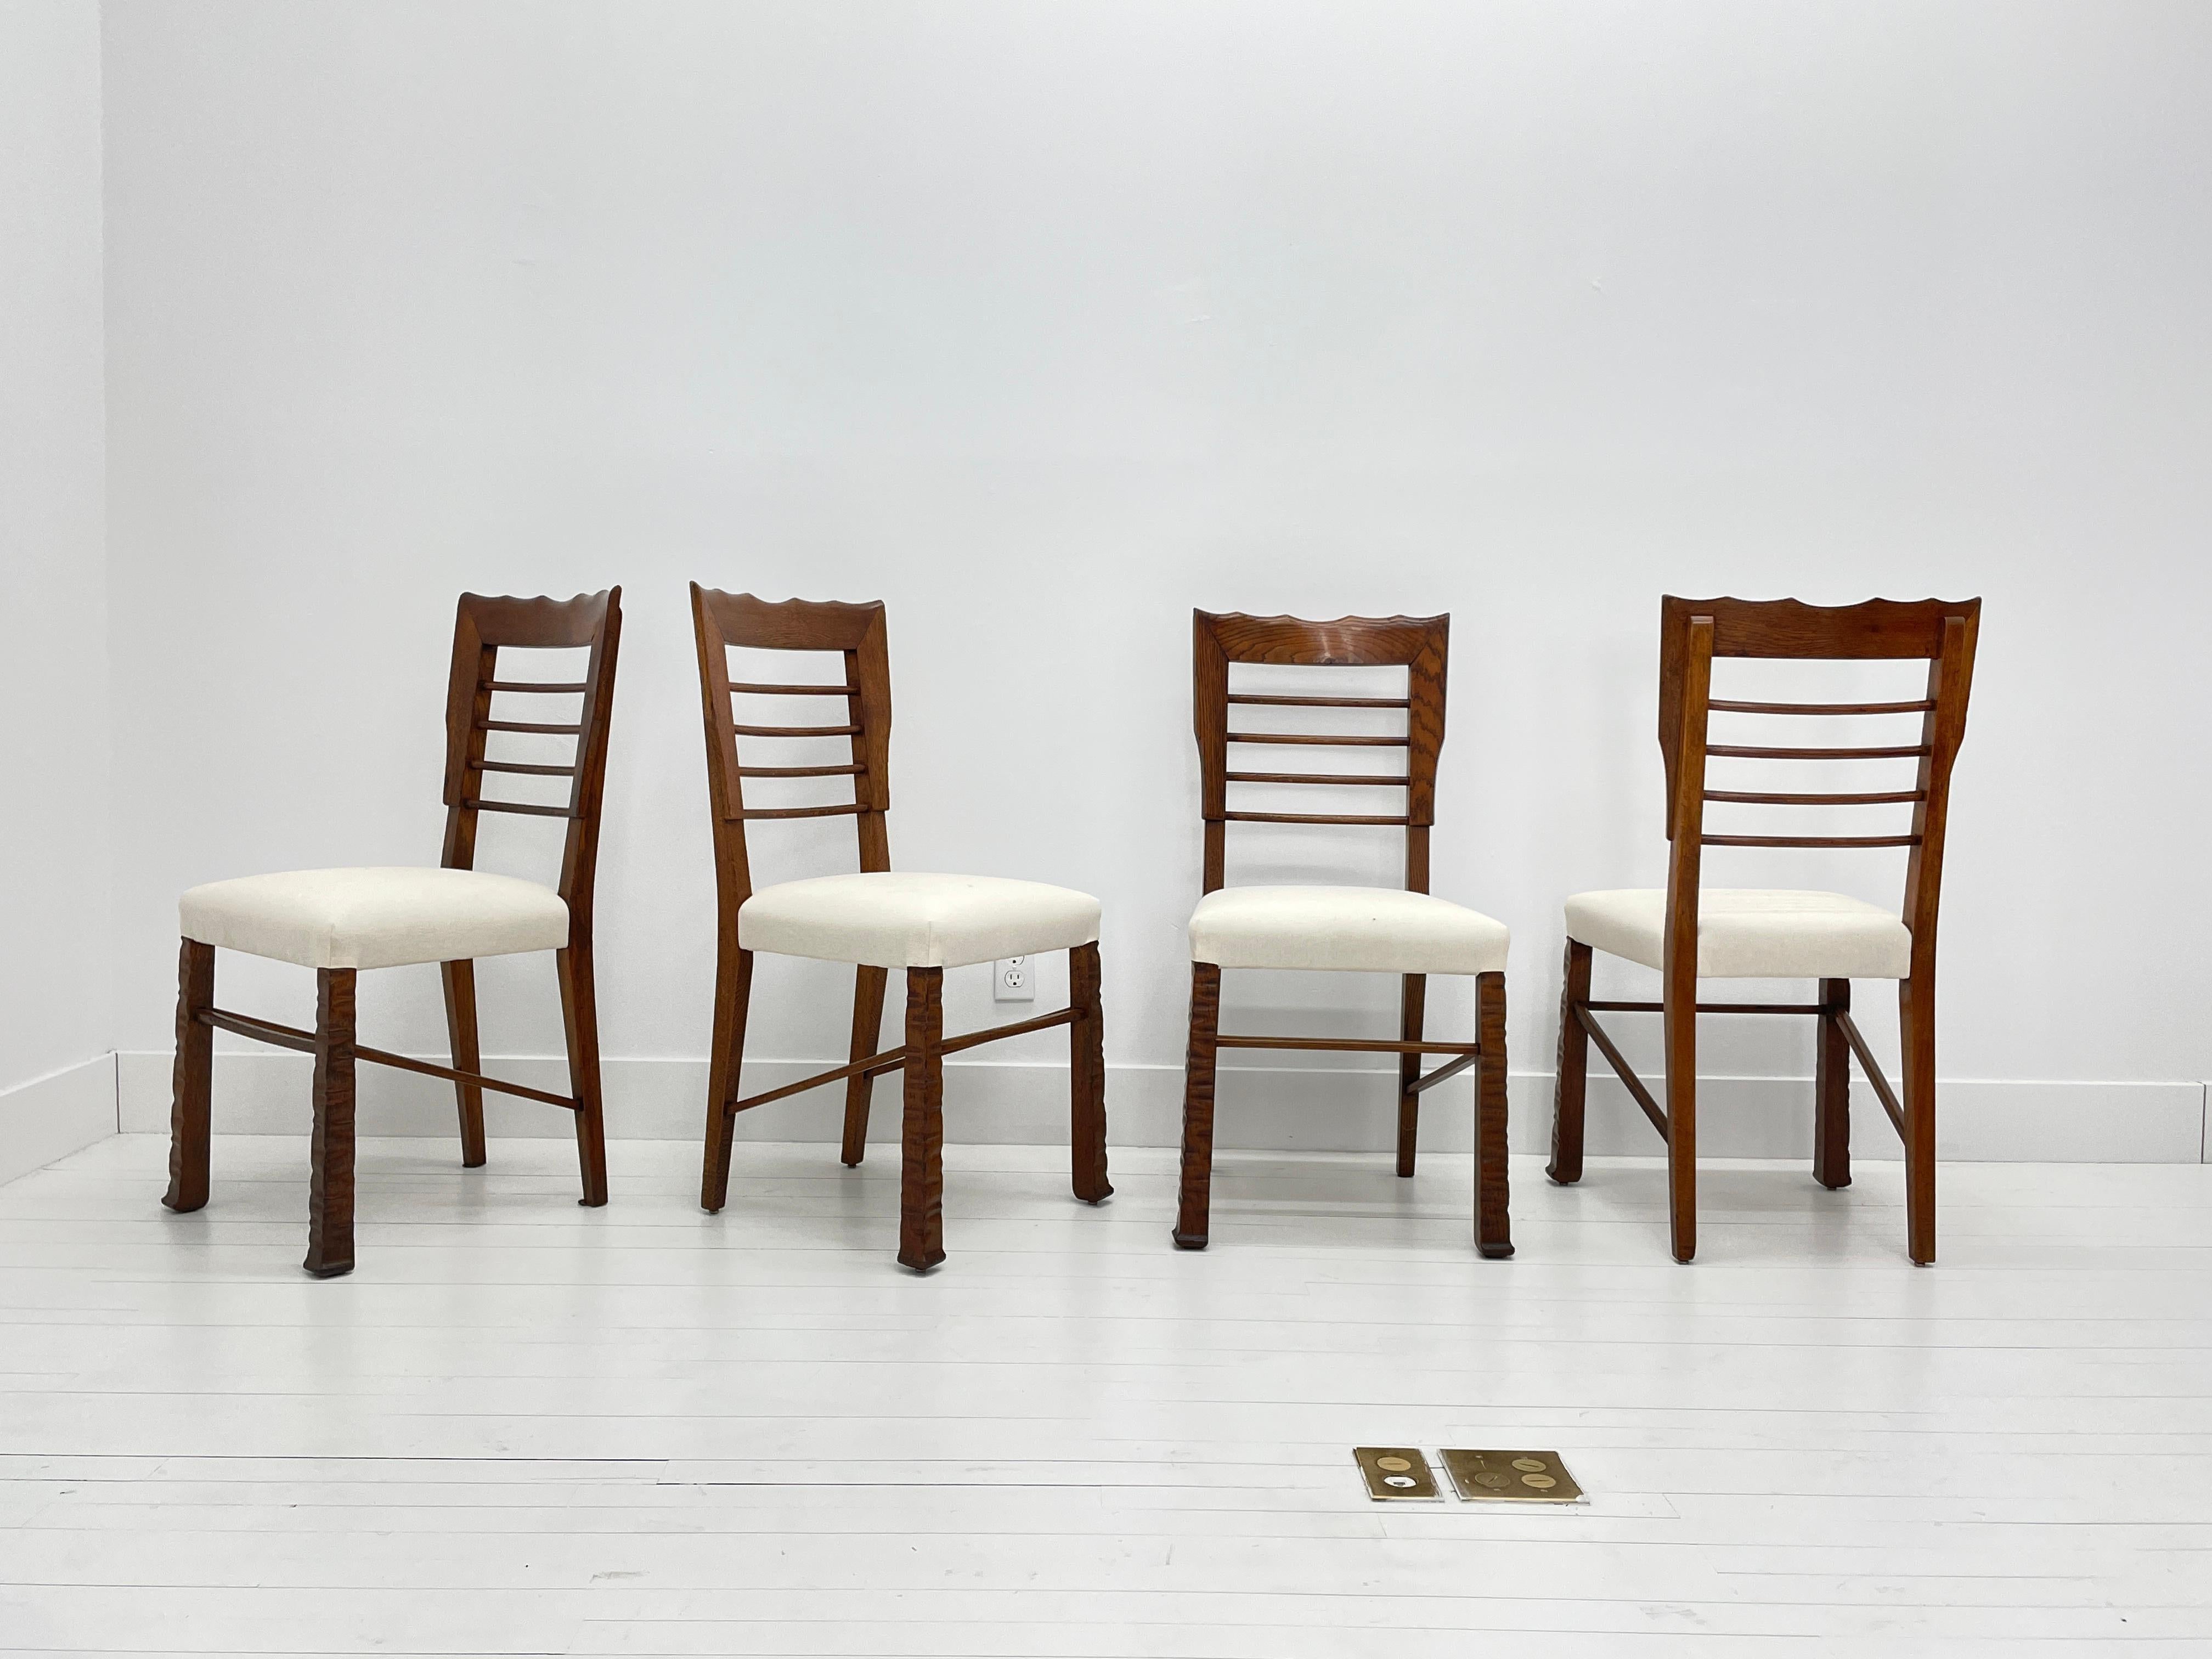 Hand-Carved Rustic Scalloped Edge Dining Chairs, Set of 10, Italy, 1940's For Sale